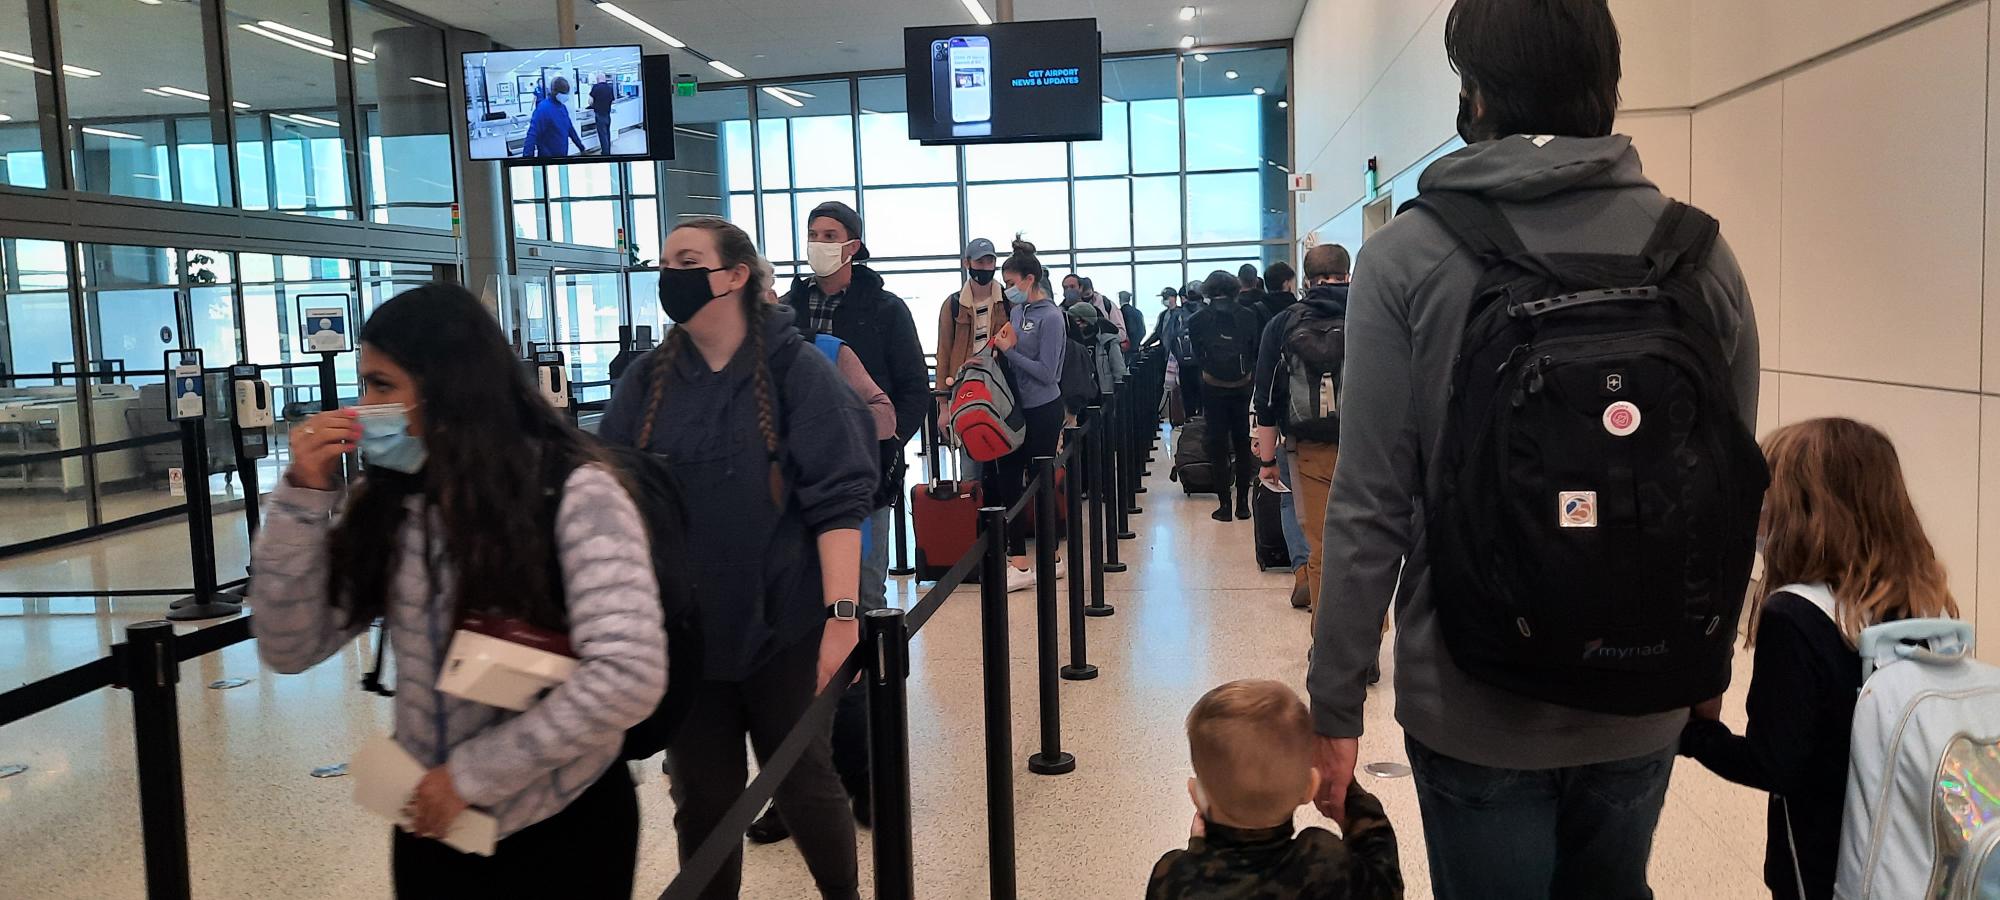 Travelers should expect crowds this holiday season at the Salt Lake International Airport.
(Photo: ...